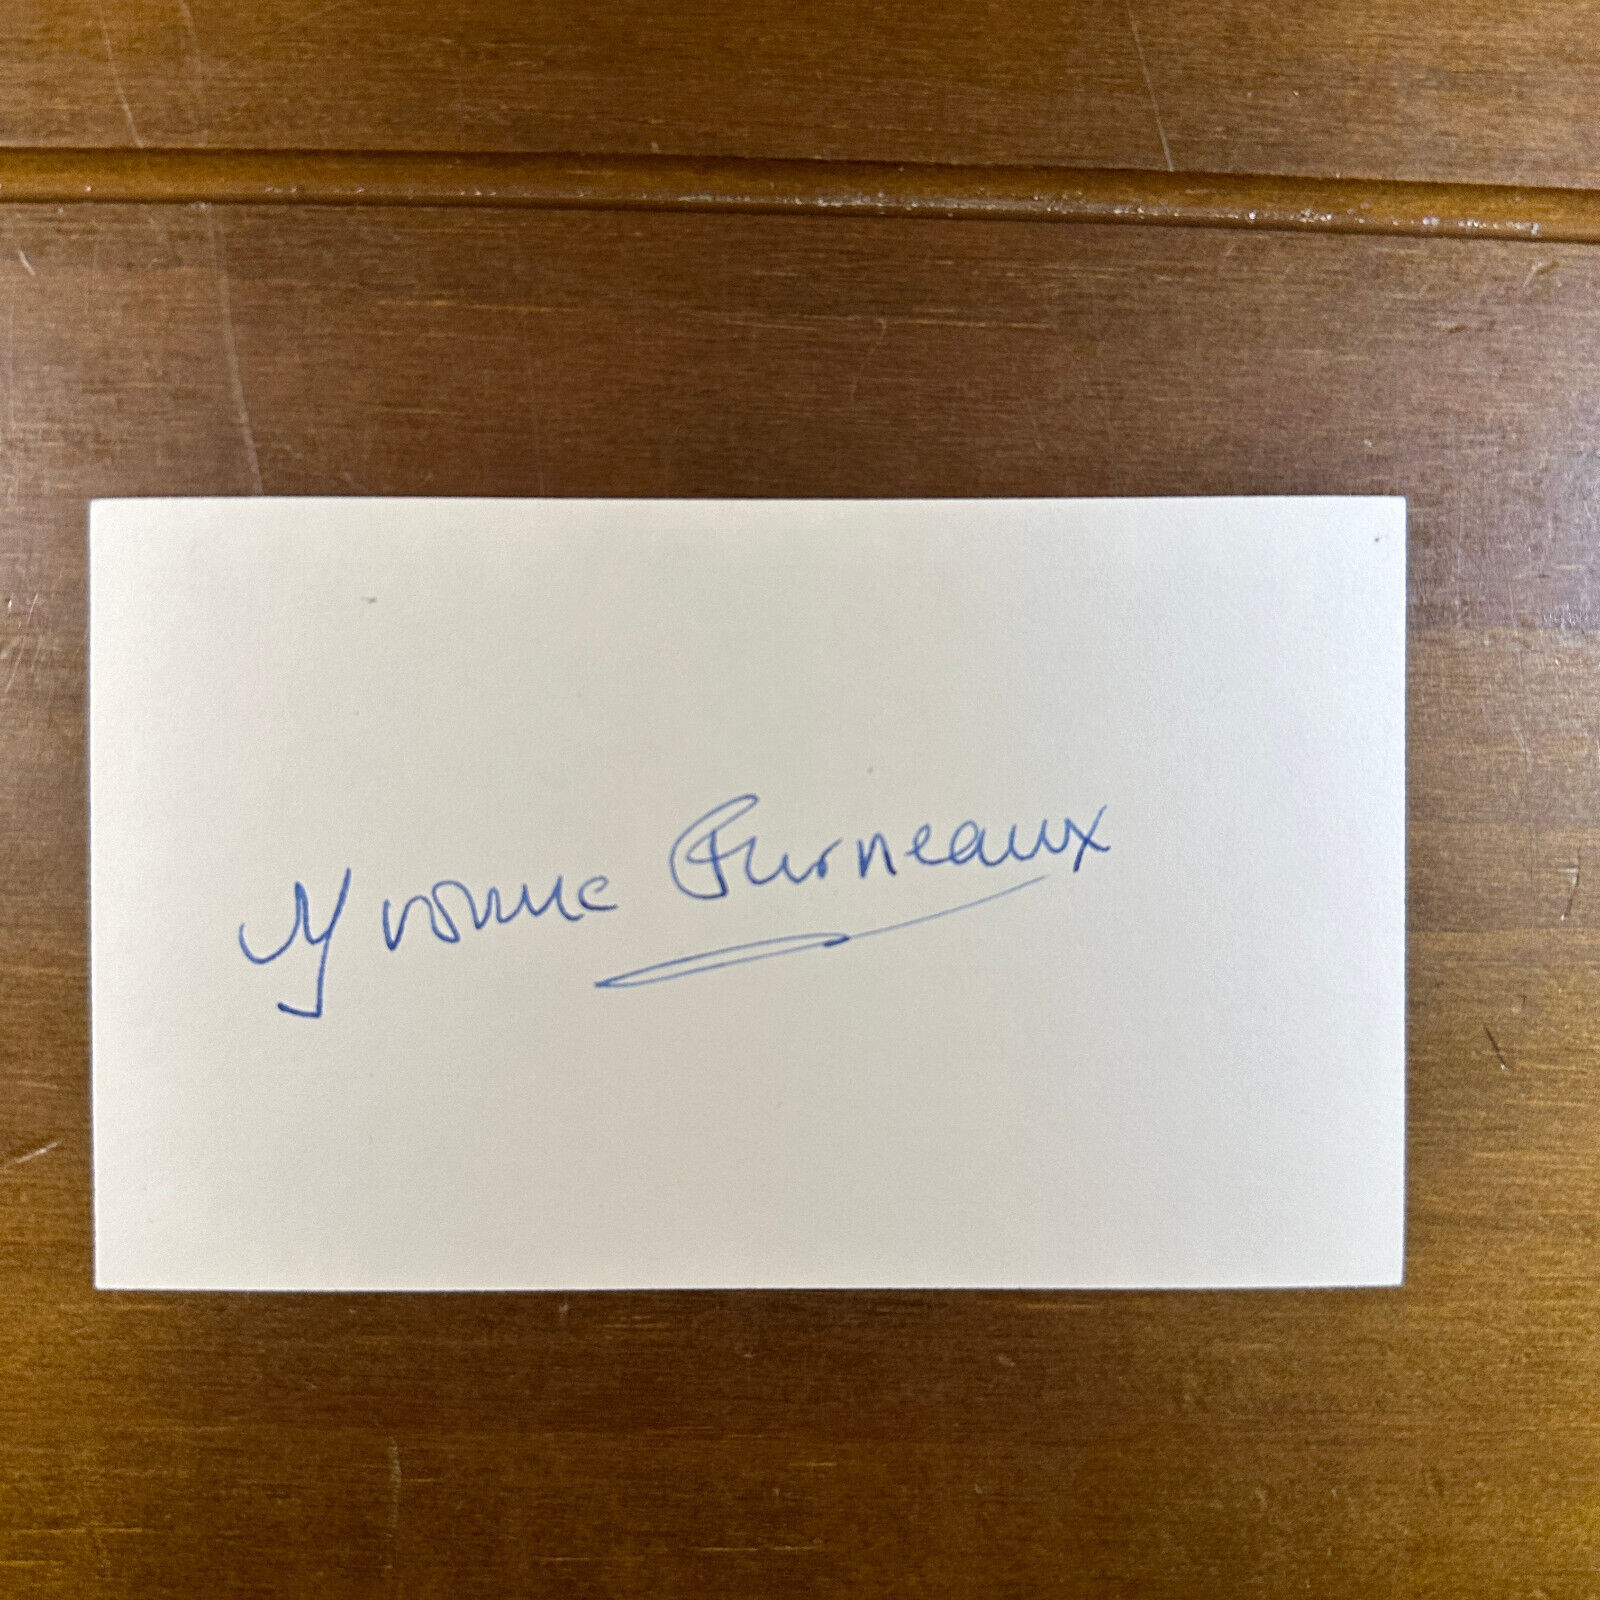 Yvonne Furneaux Signed Autographed 3x5 Index Card